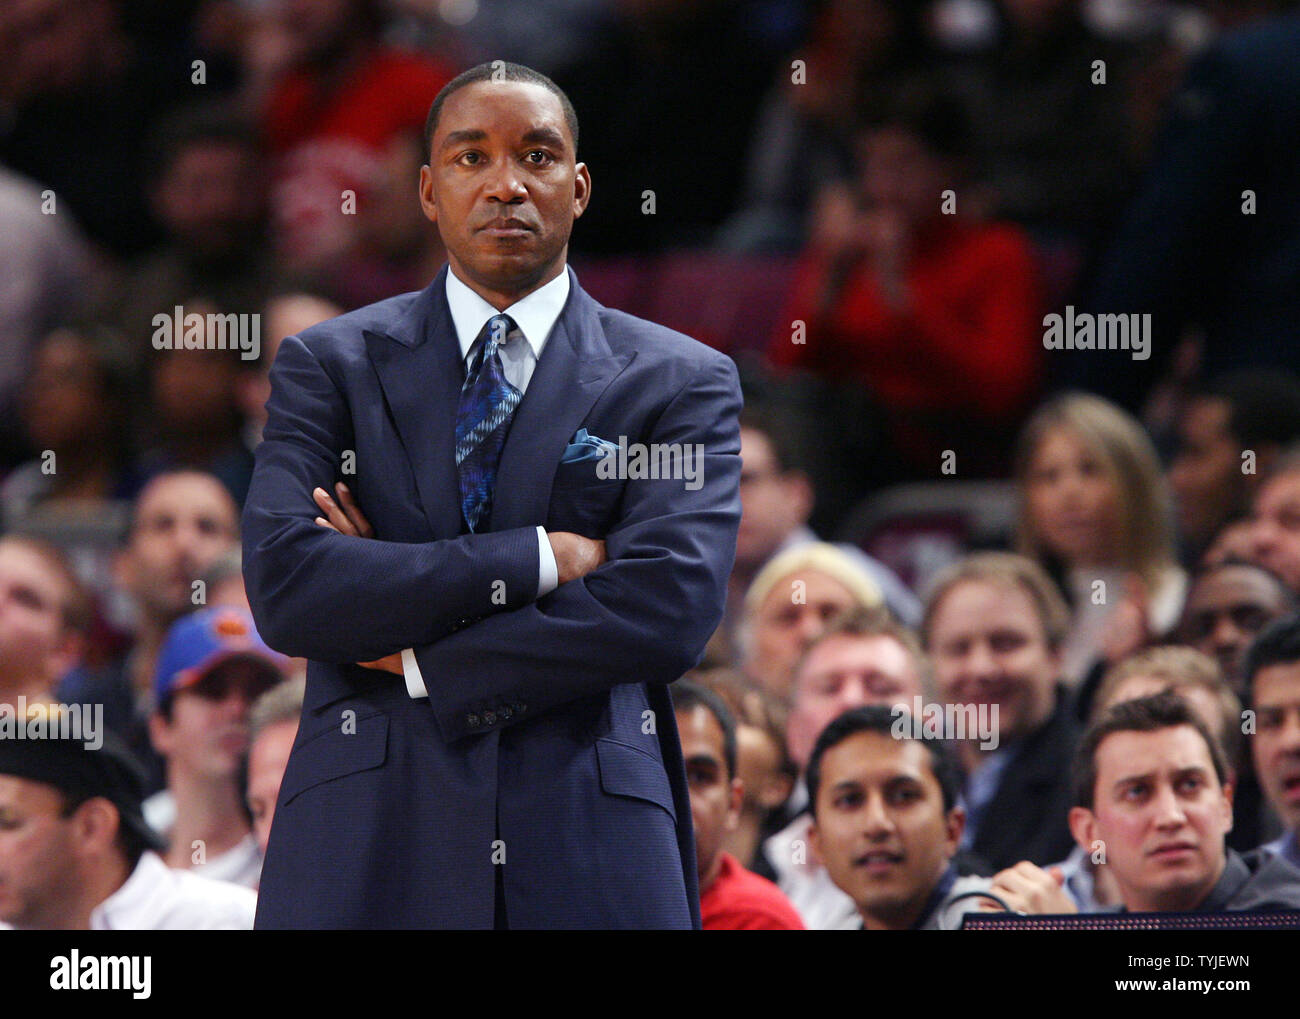 New York Knicks head coach Isiah Thomas stands up during the second quarter against the Detroit Pistons at Madison Square Garden in New York City on March 7, 2008.    (UPI Photo/John Angelillo) Stock Photo